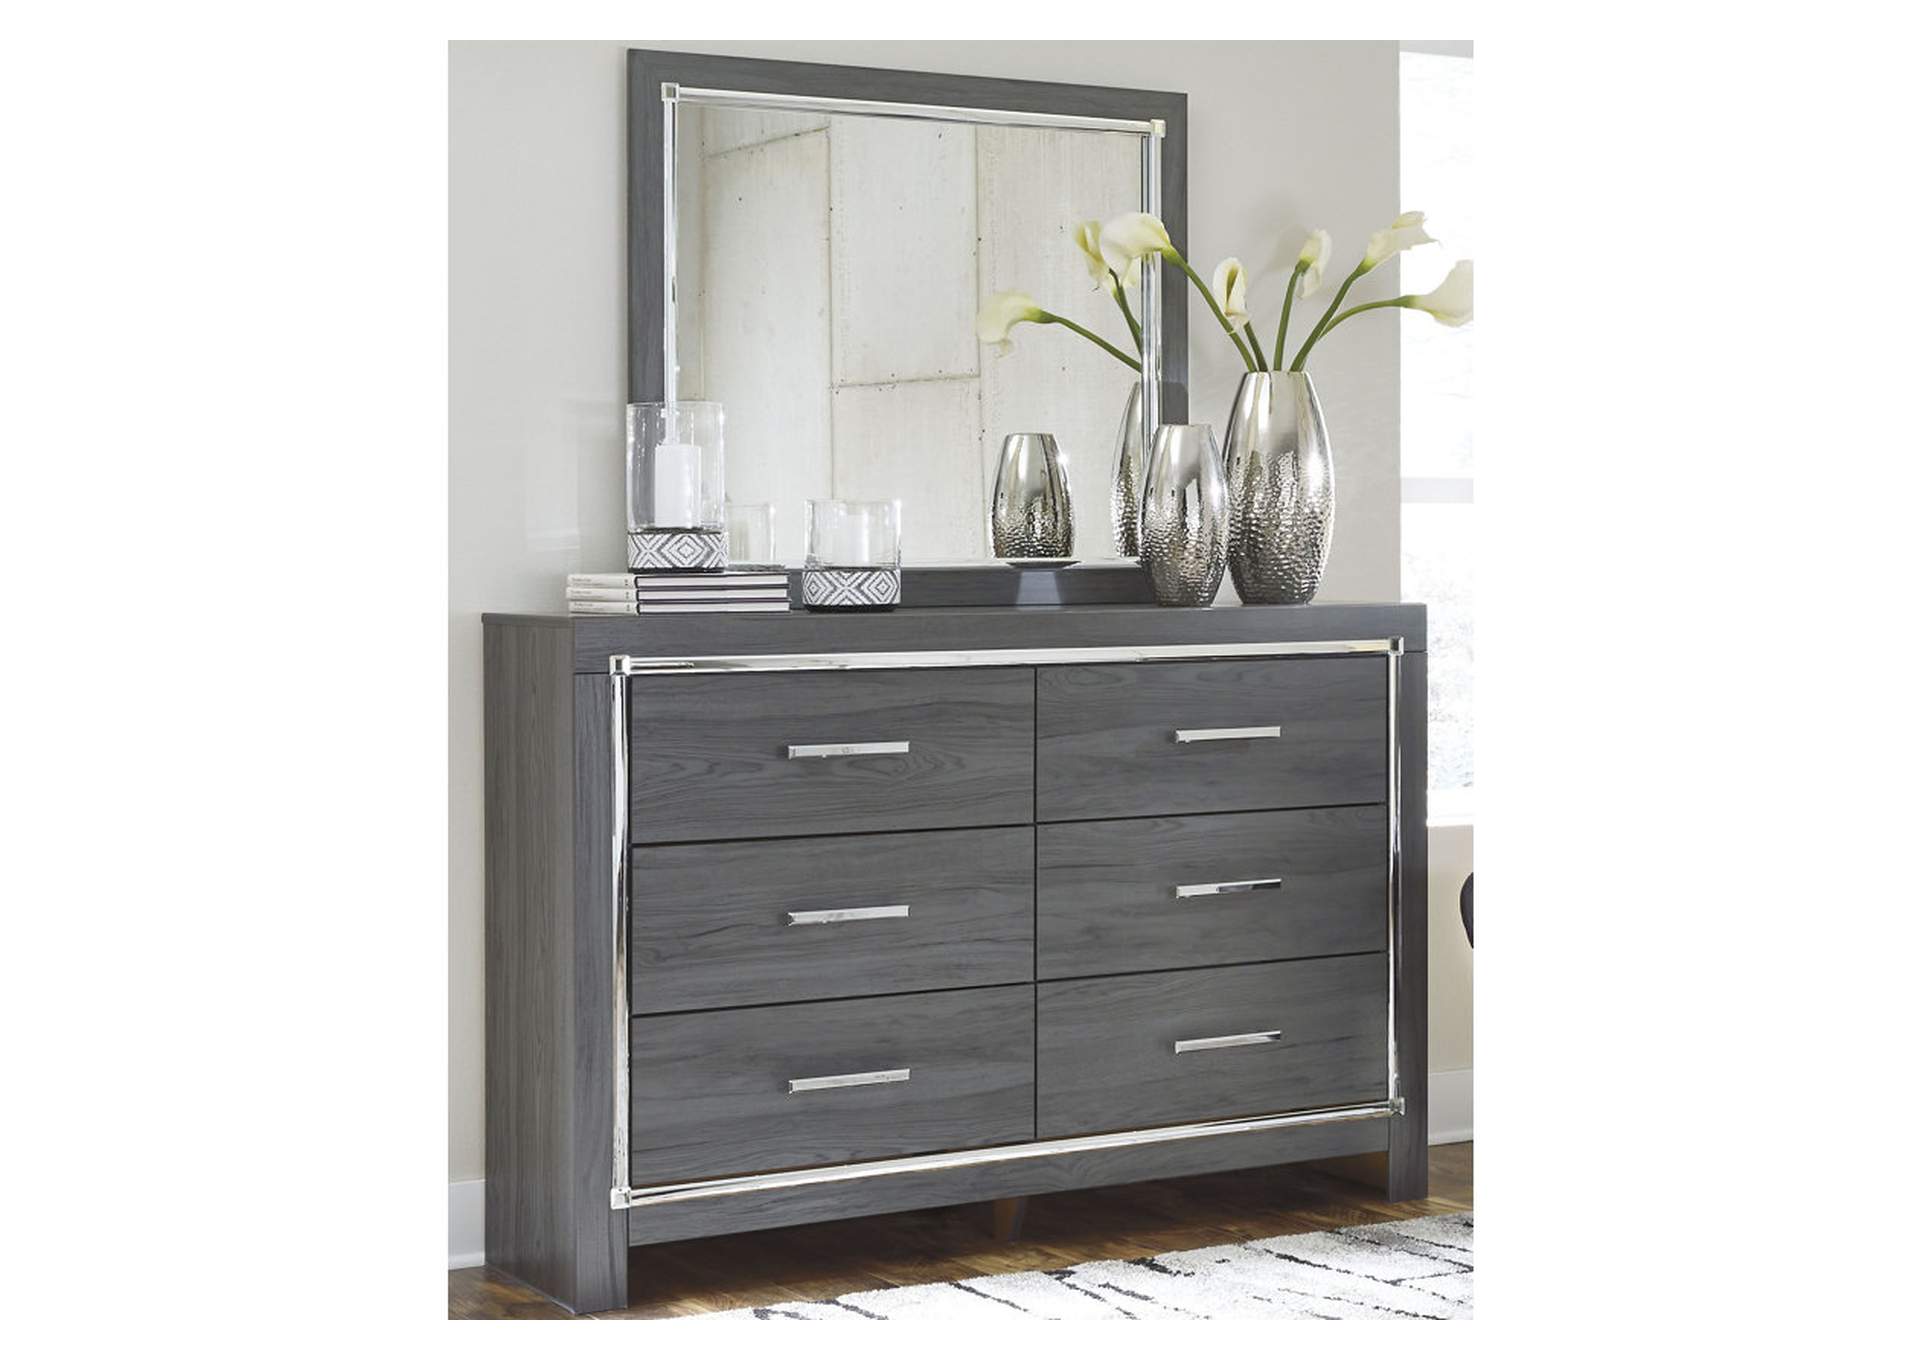 Lodanna Full Panel Bed with Mirrored Dresser,Signature Design By Ashley